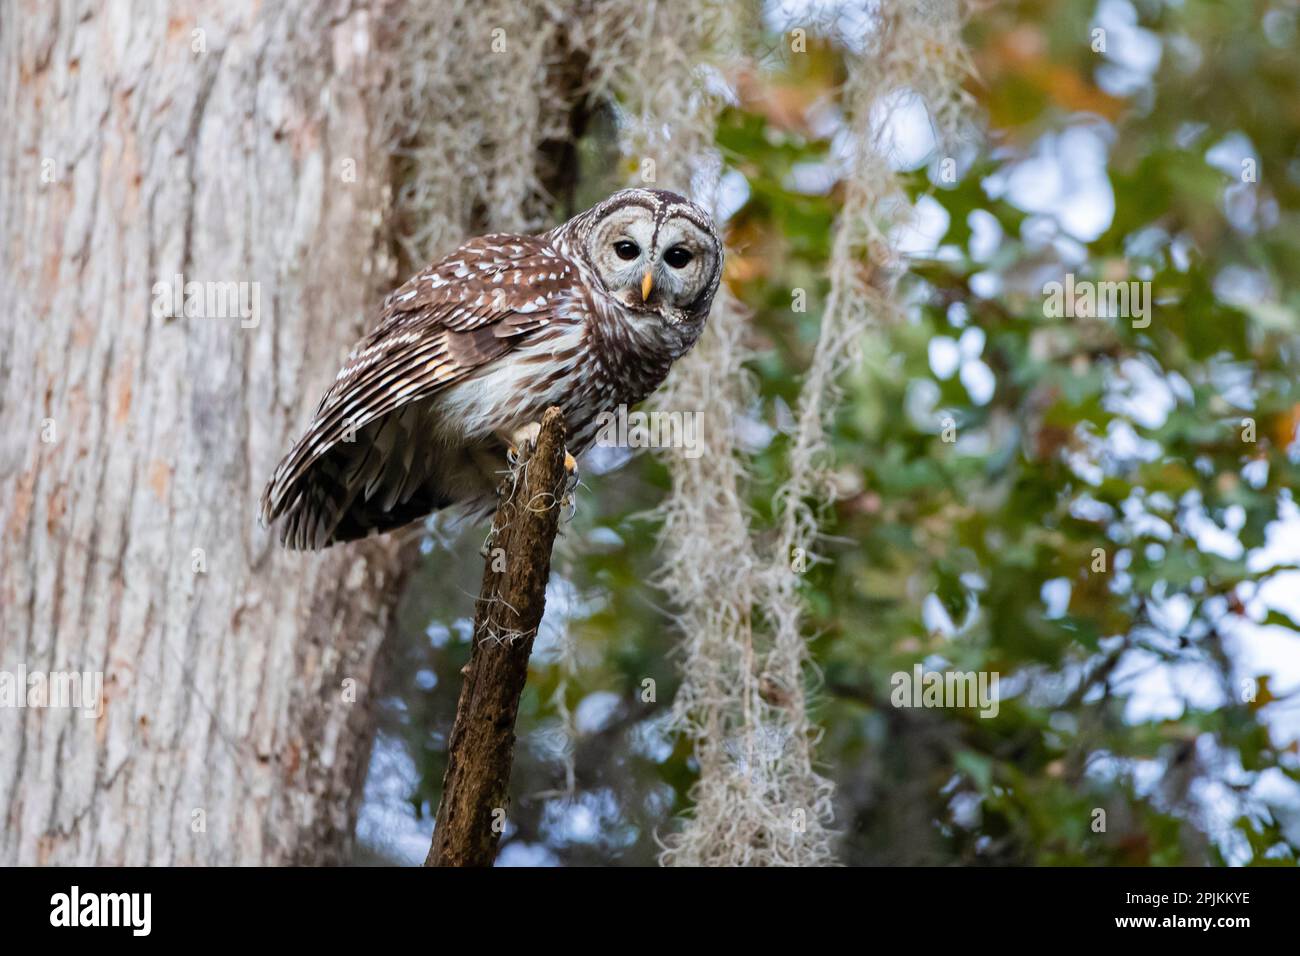 Barred owl perched in bald cypress forest with Spanish moss Stock Photo